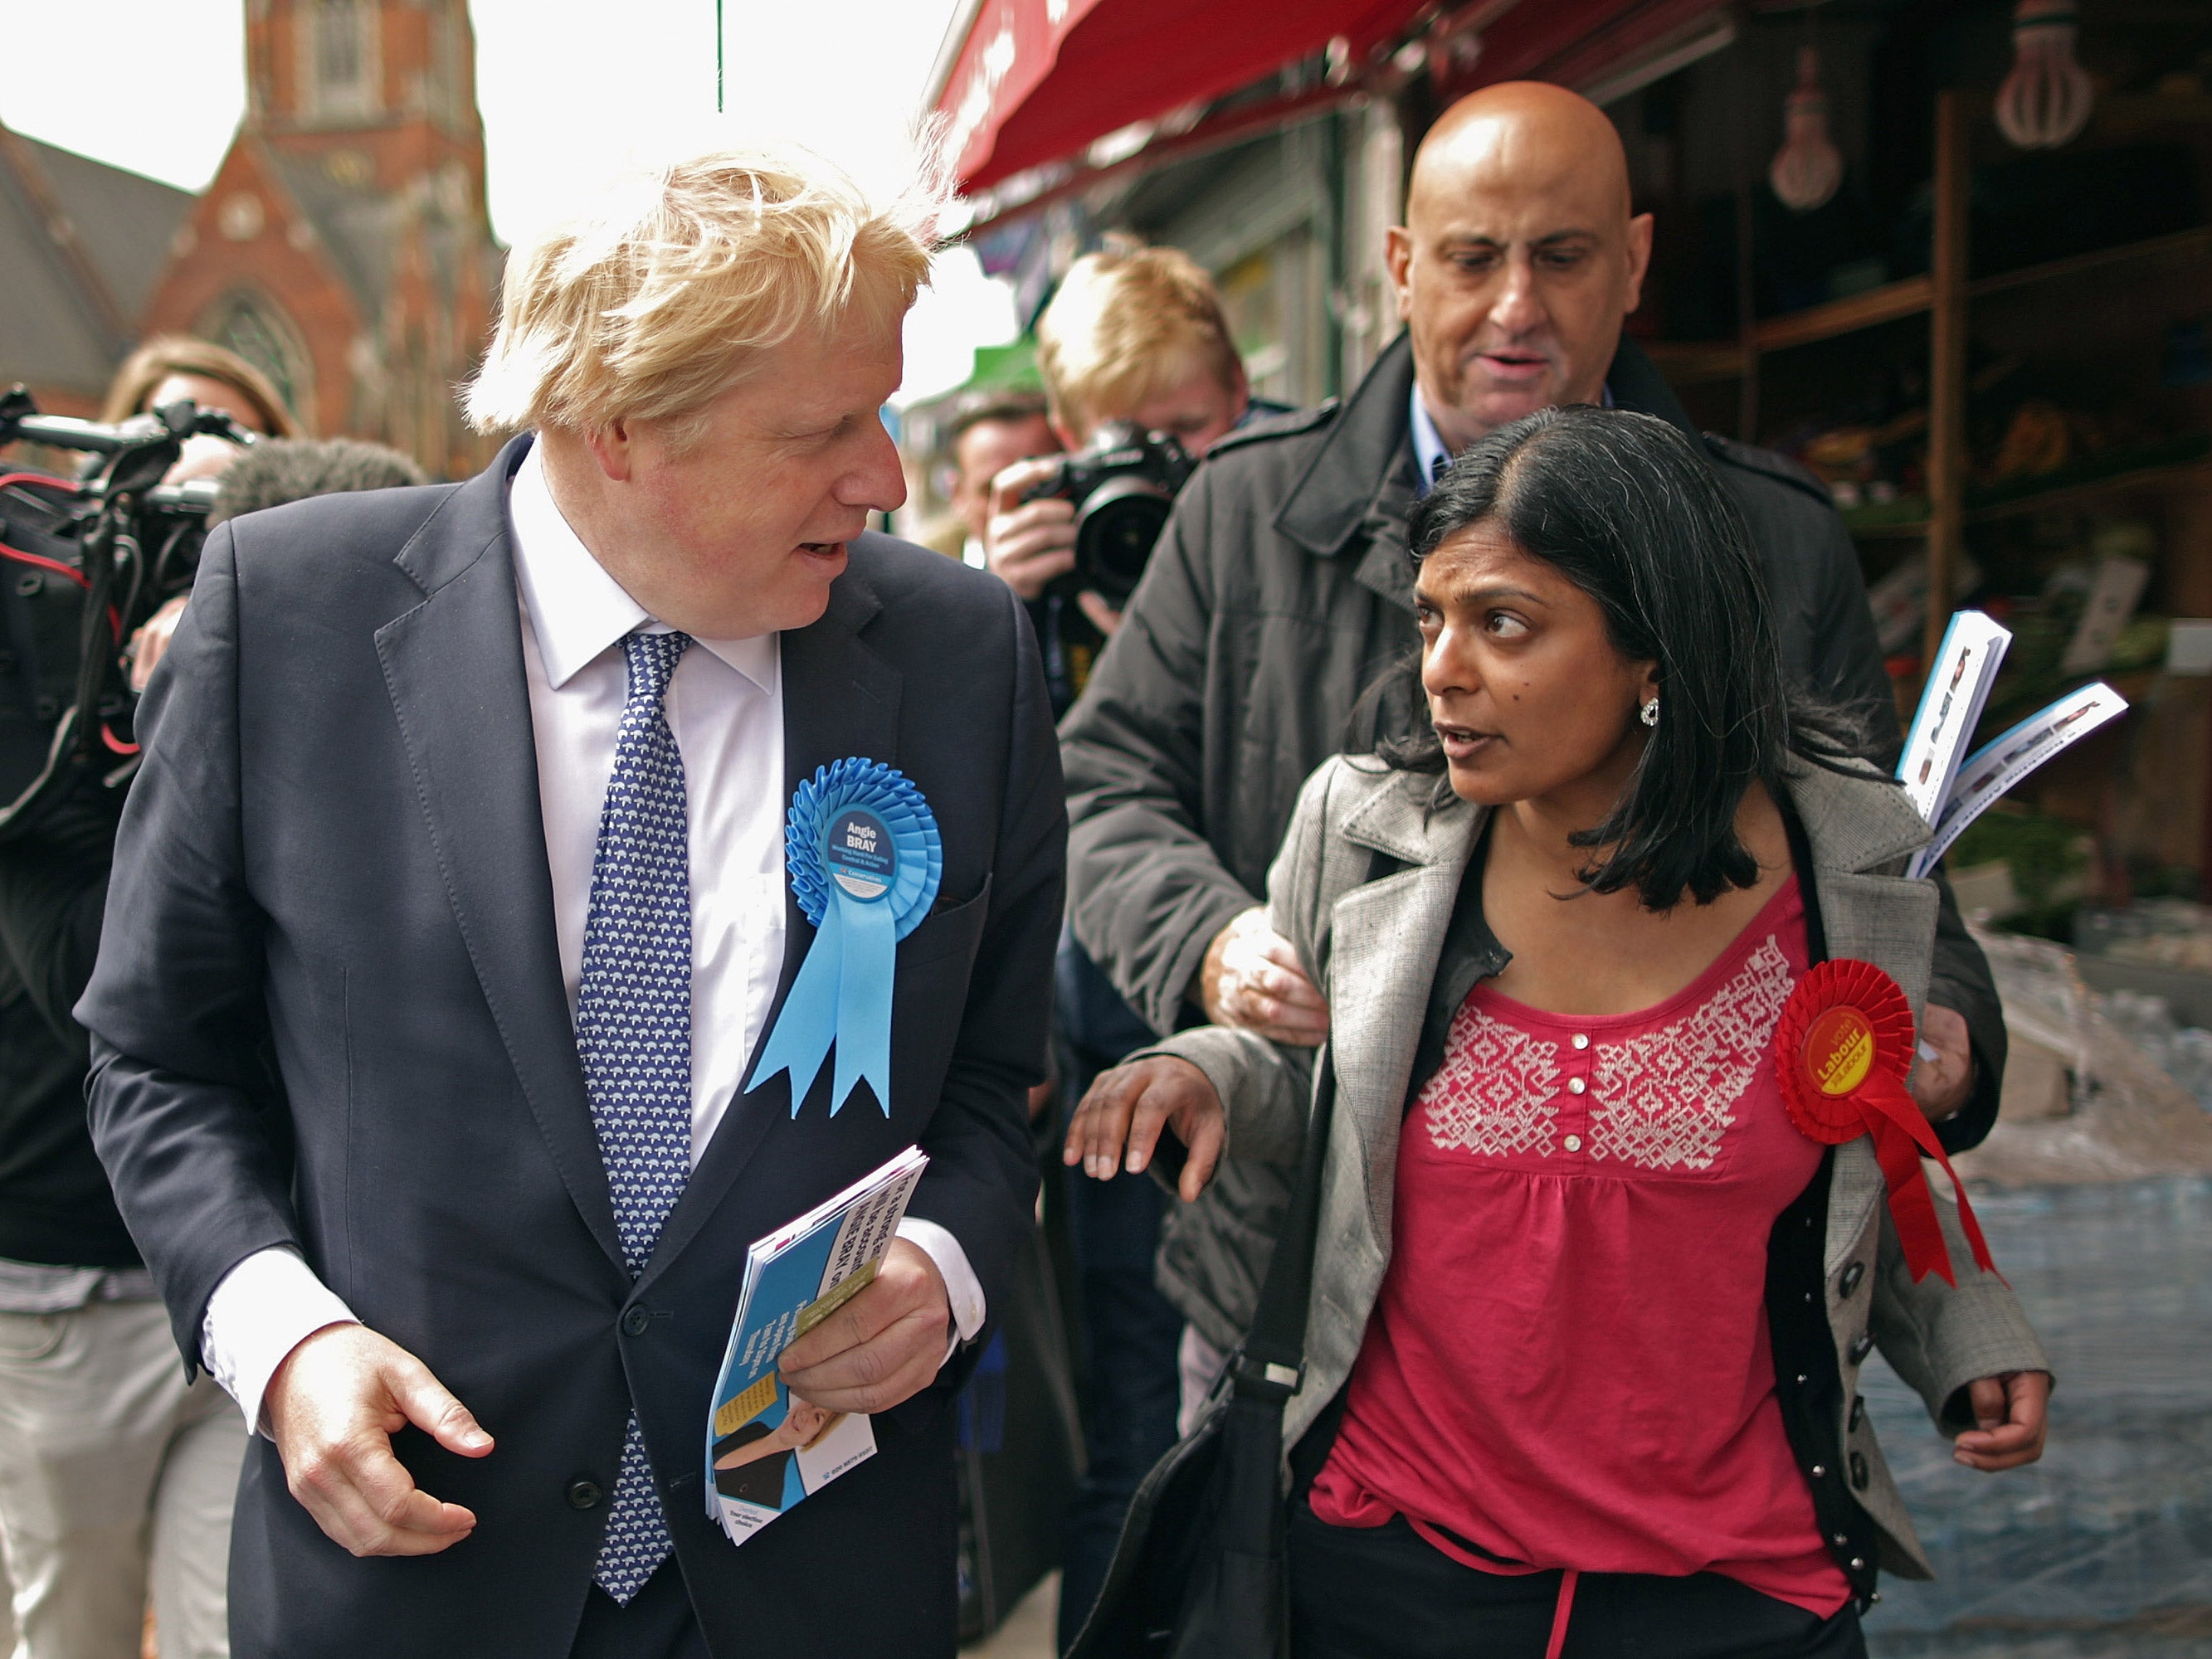 Labour candidate Rupa Huq is manhandled by a Tory activist during the election campaign in Ealing Central and Acton